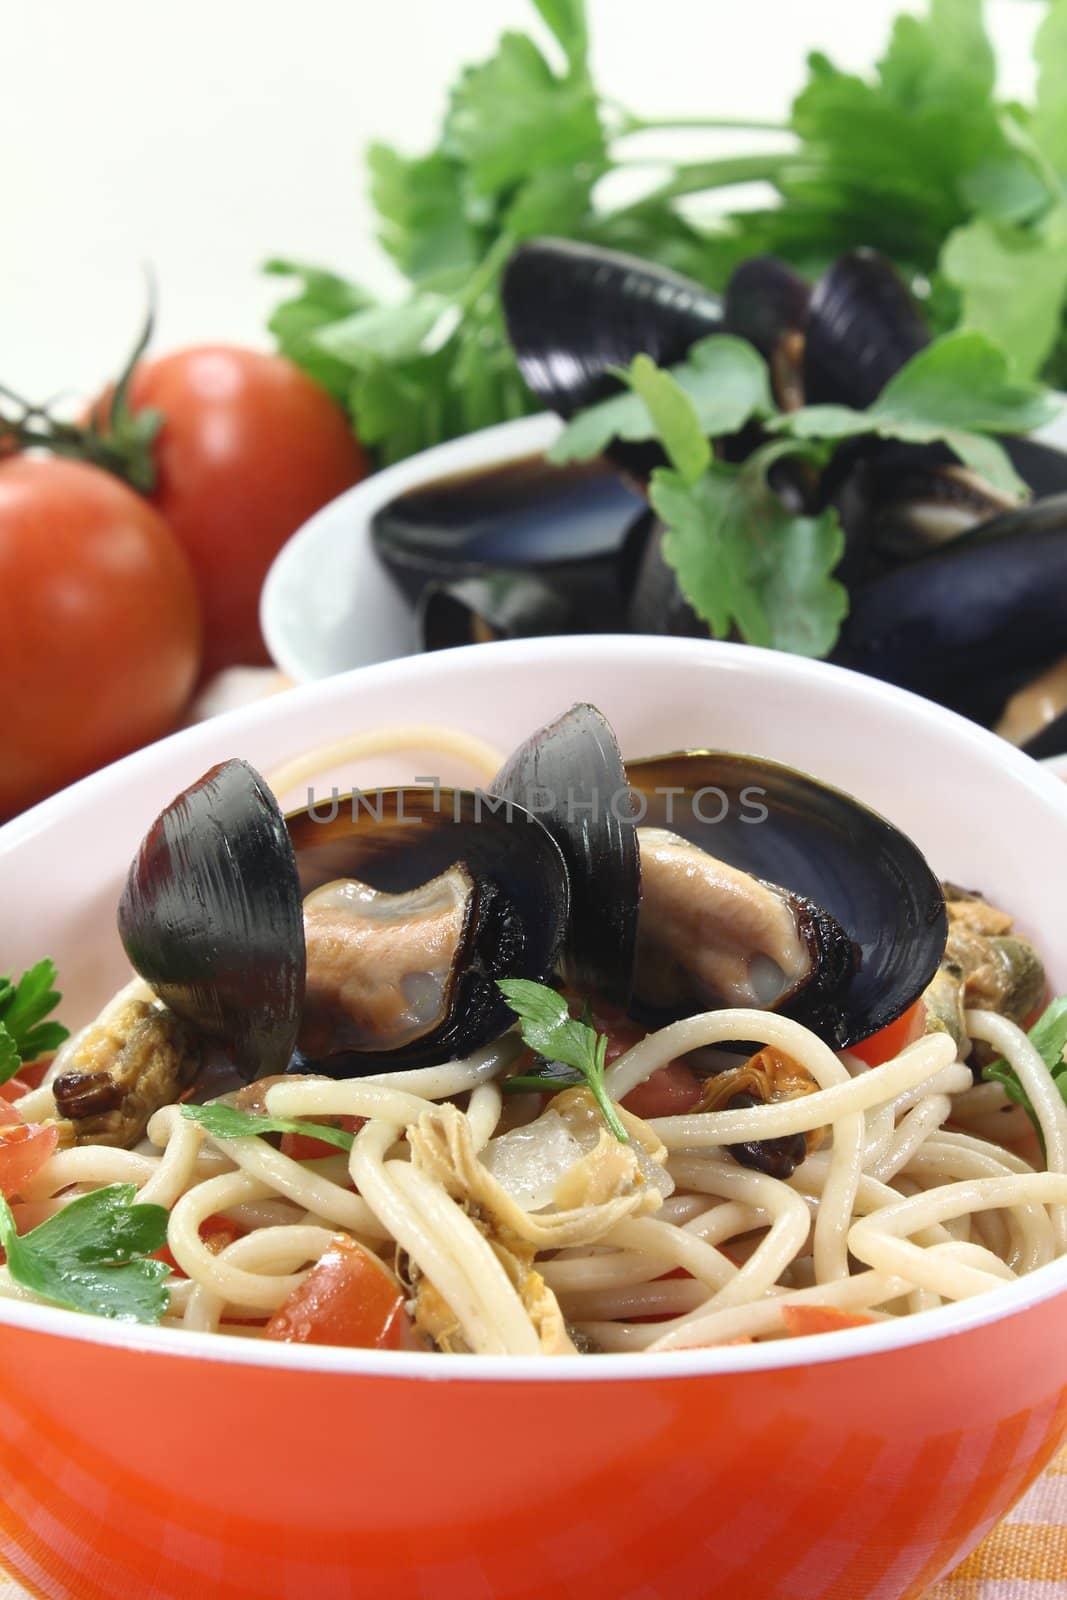 Spaghetti with tomatoes and mussels on a light background